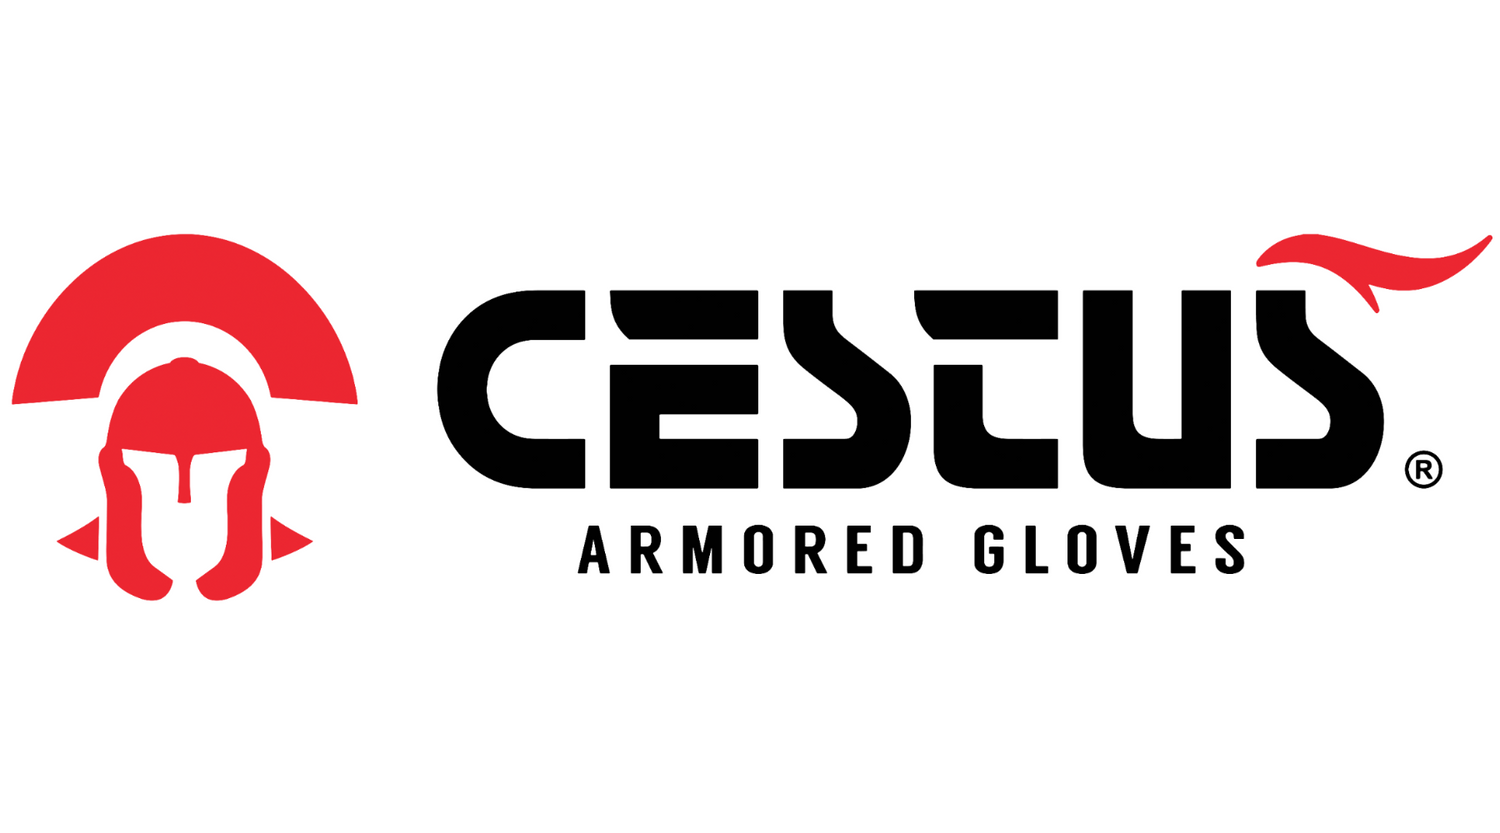 How To Properly Take Care of Your Work Gloves — Cestus Armored Gloves